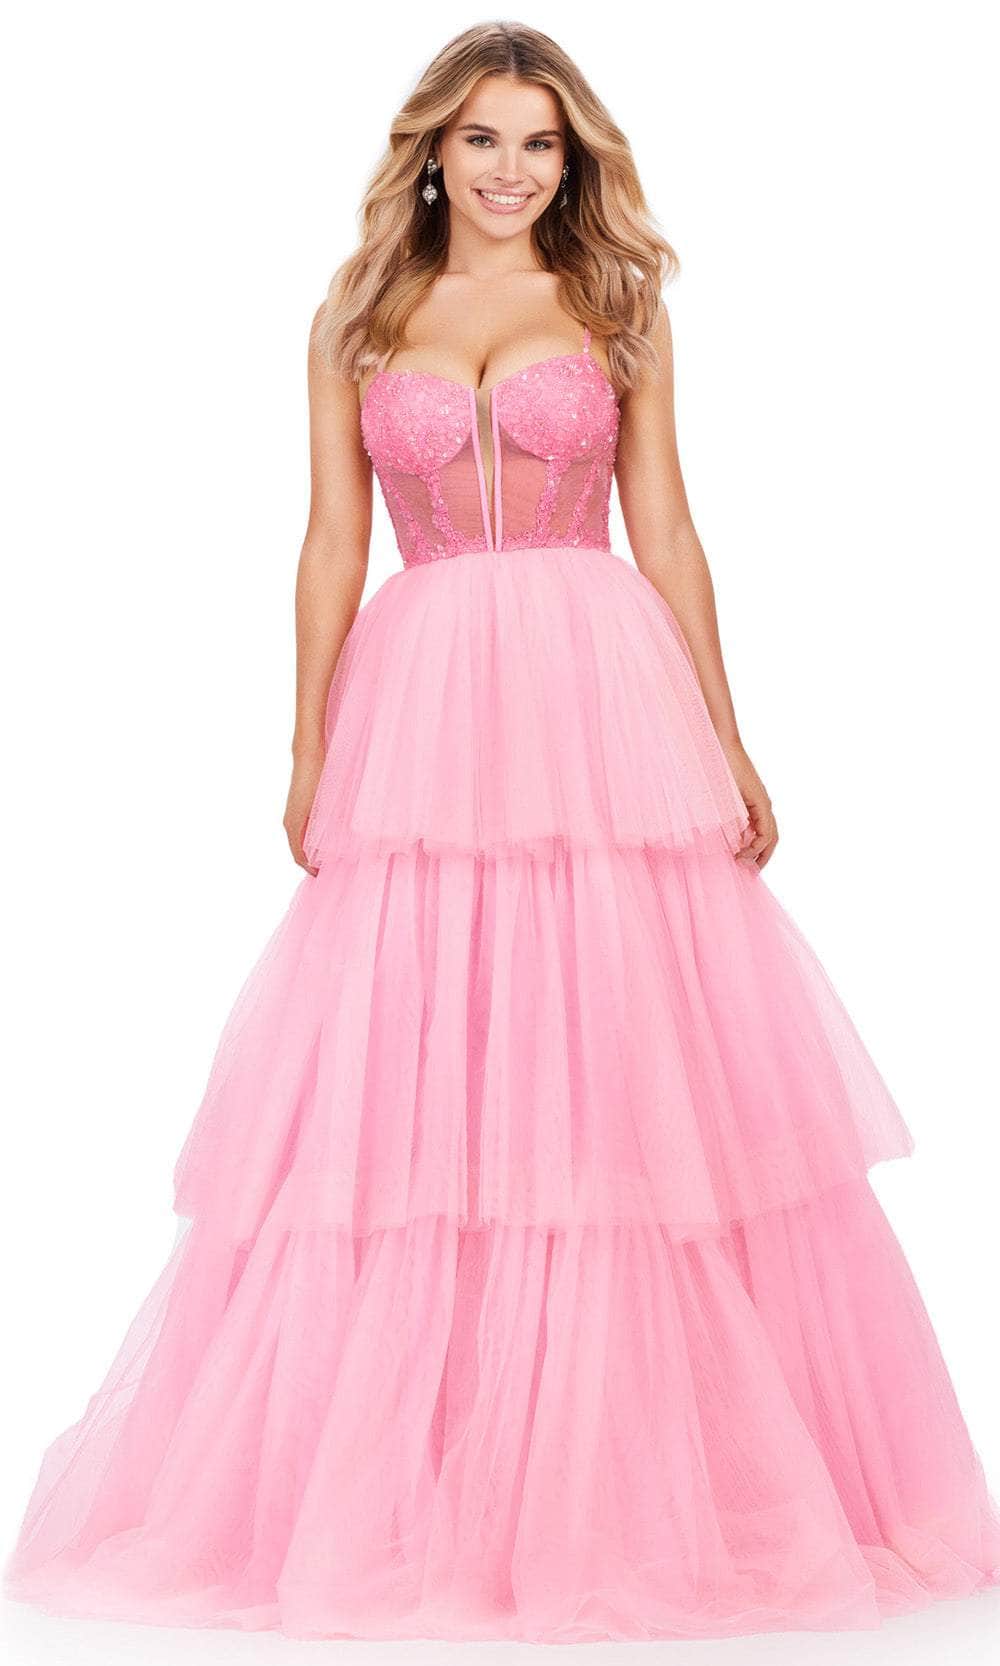 Ashley Lauren 11462 - Beaded Corset Tulle Prom Dress 00 /  Candy Pink